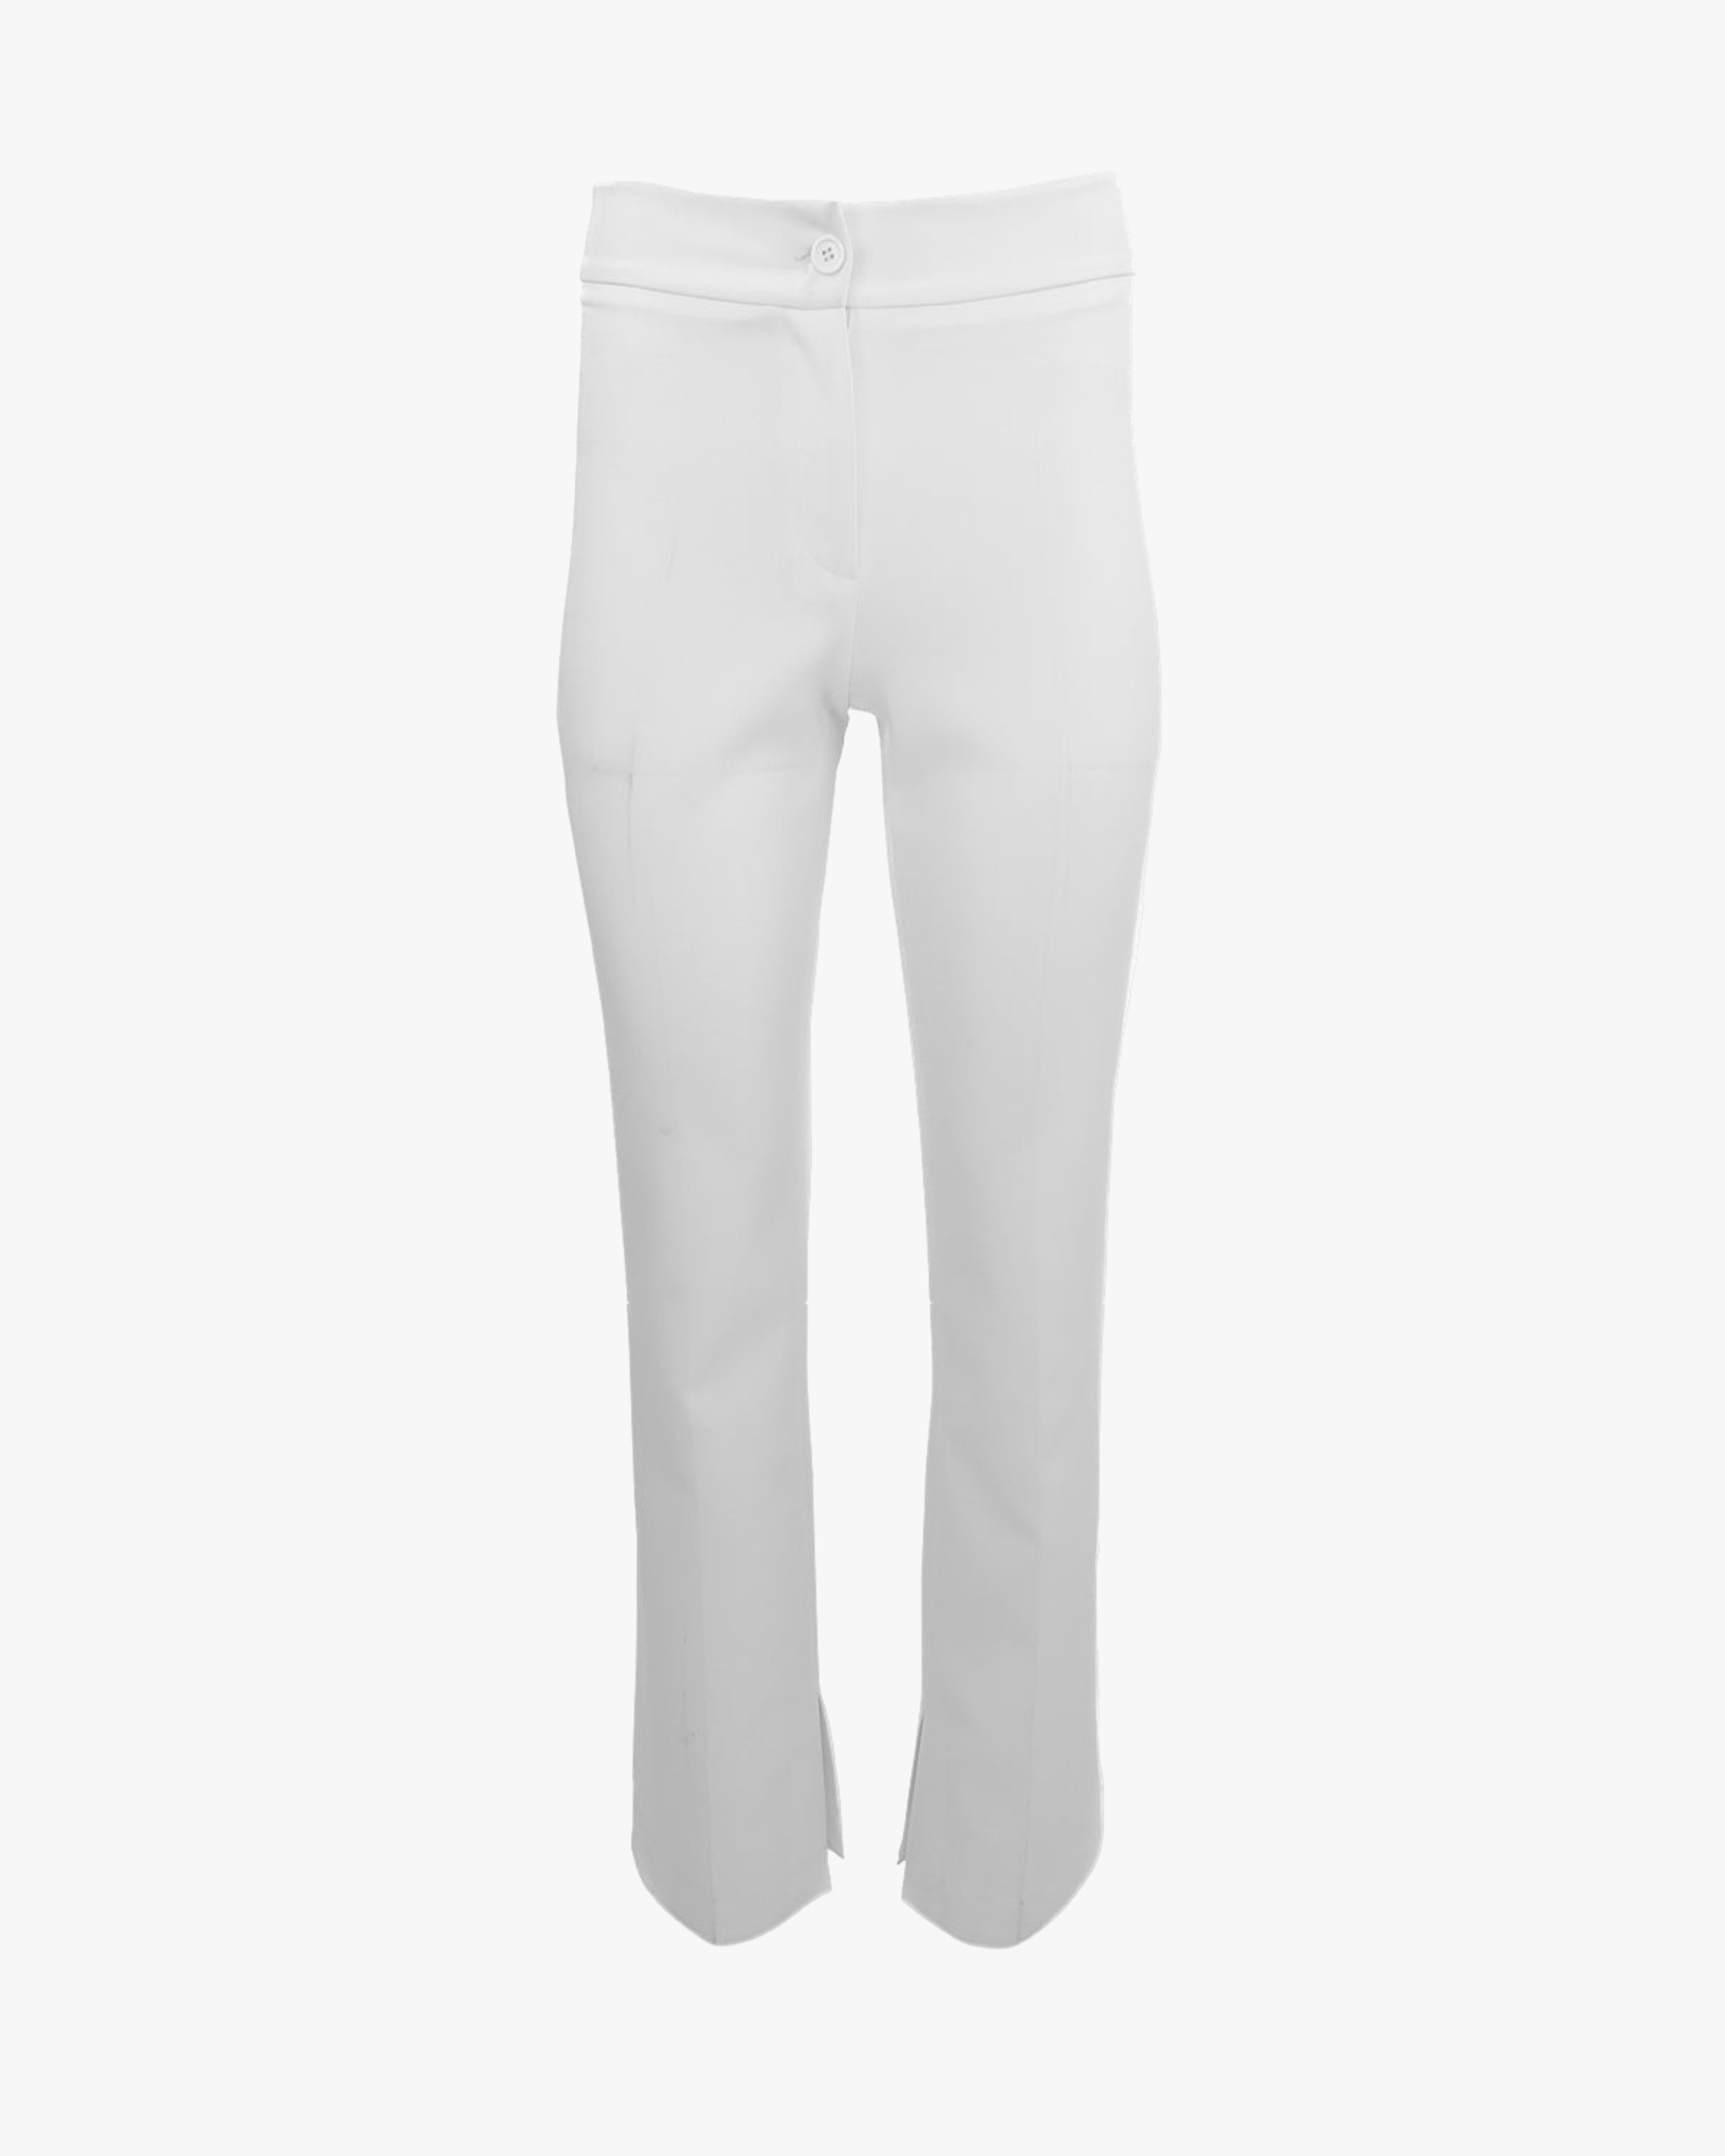 Frankie Aesthetic White Trousers by Aggi